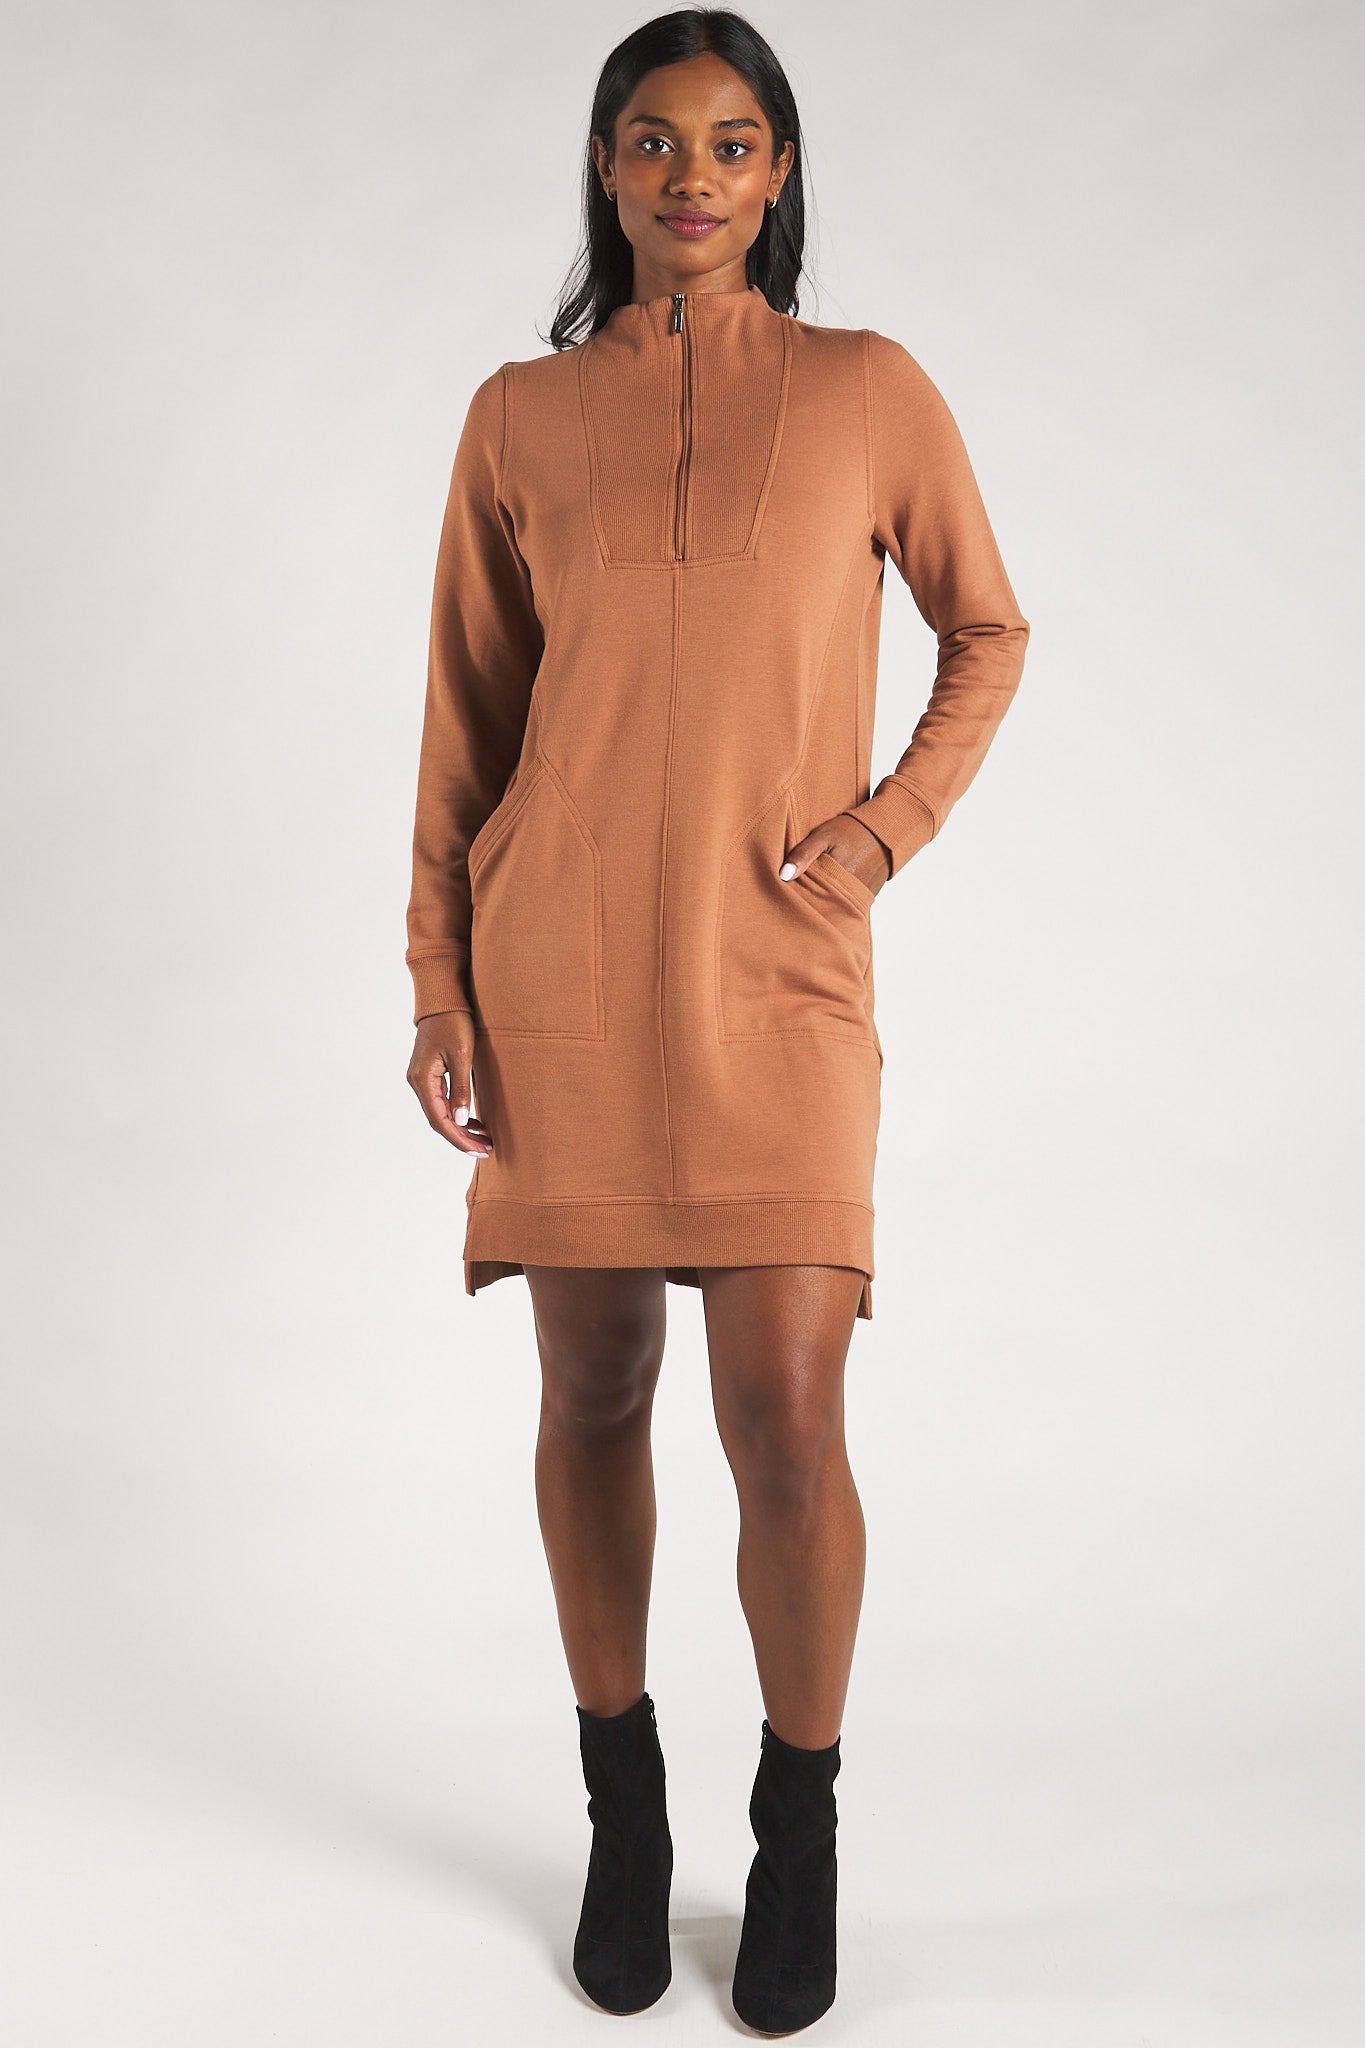 Women’s half-zip sweater dress made from sustainable bamboo fleece in the colour Warm Brown.